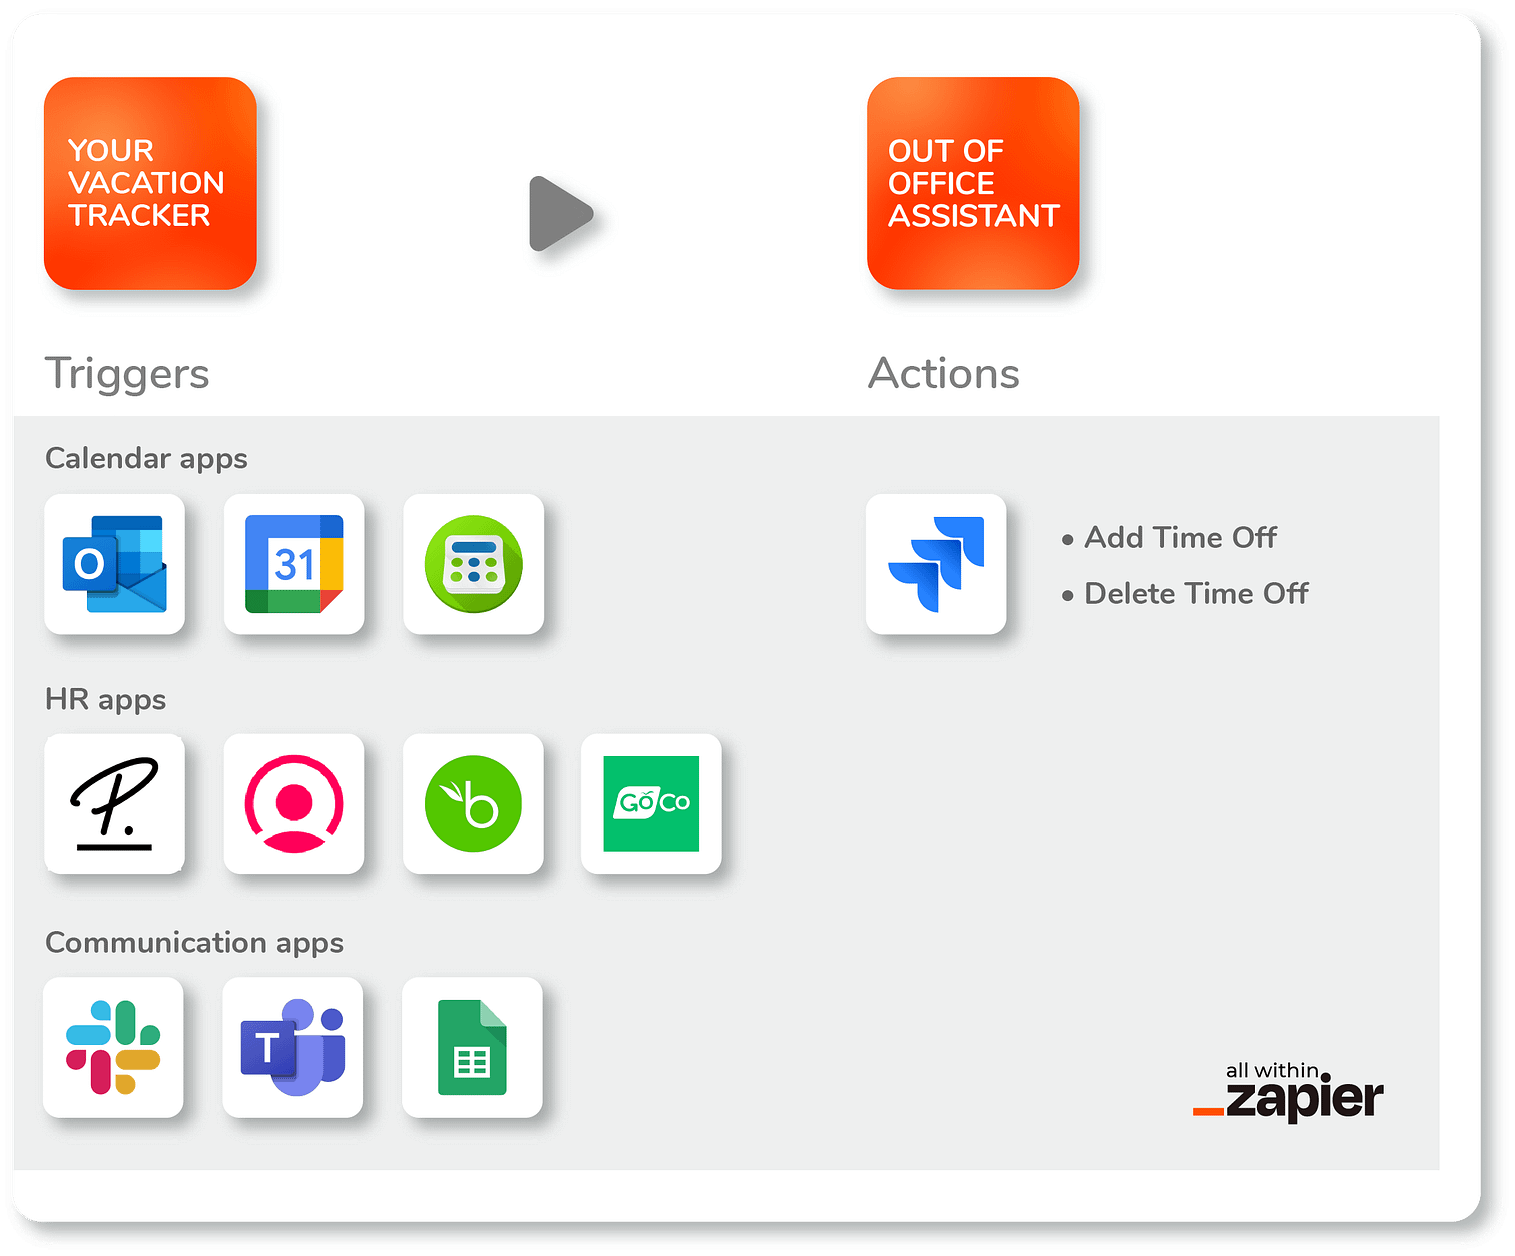 options to integrate vacation tracking apps with jira using Zapier